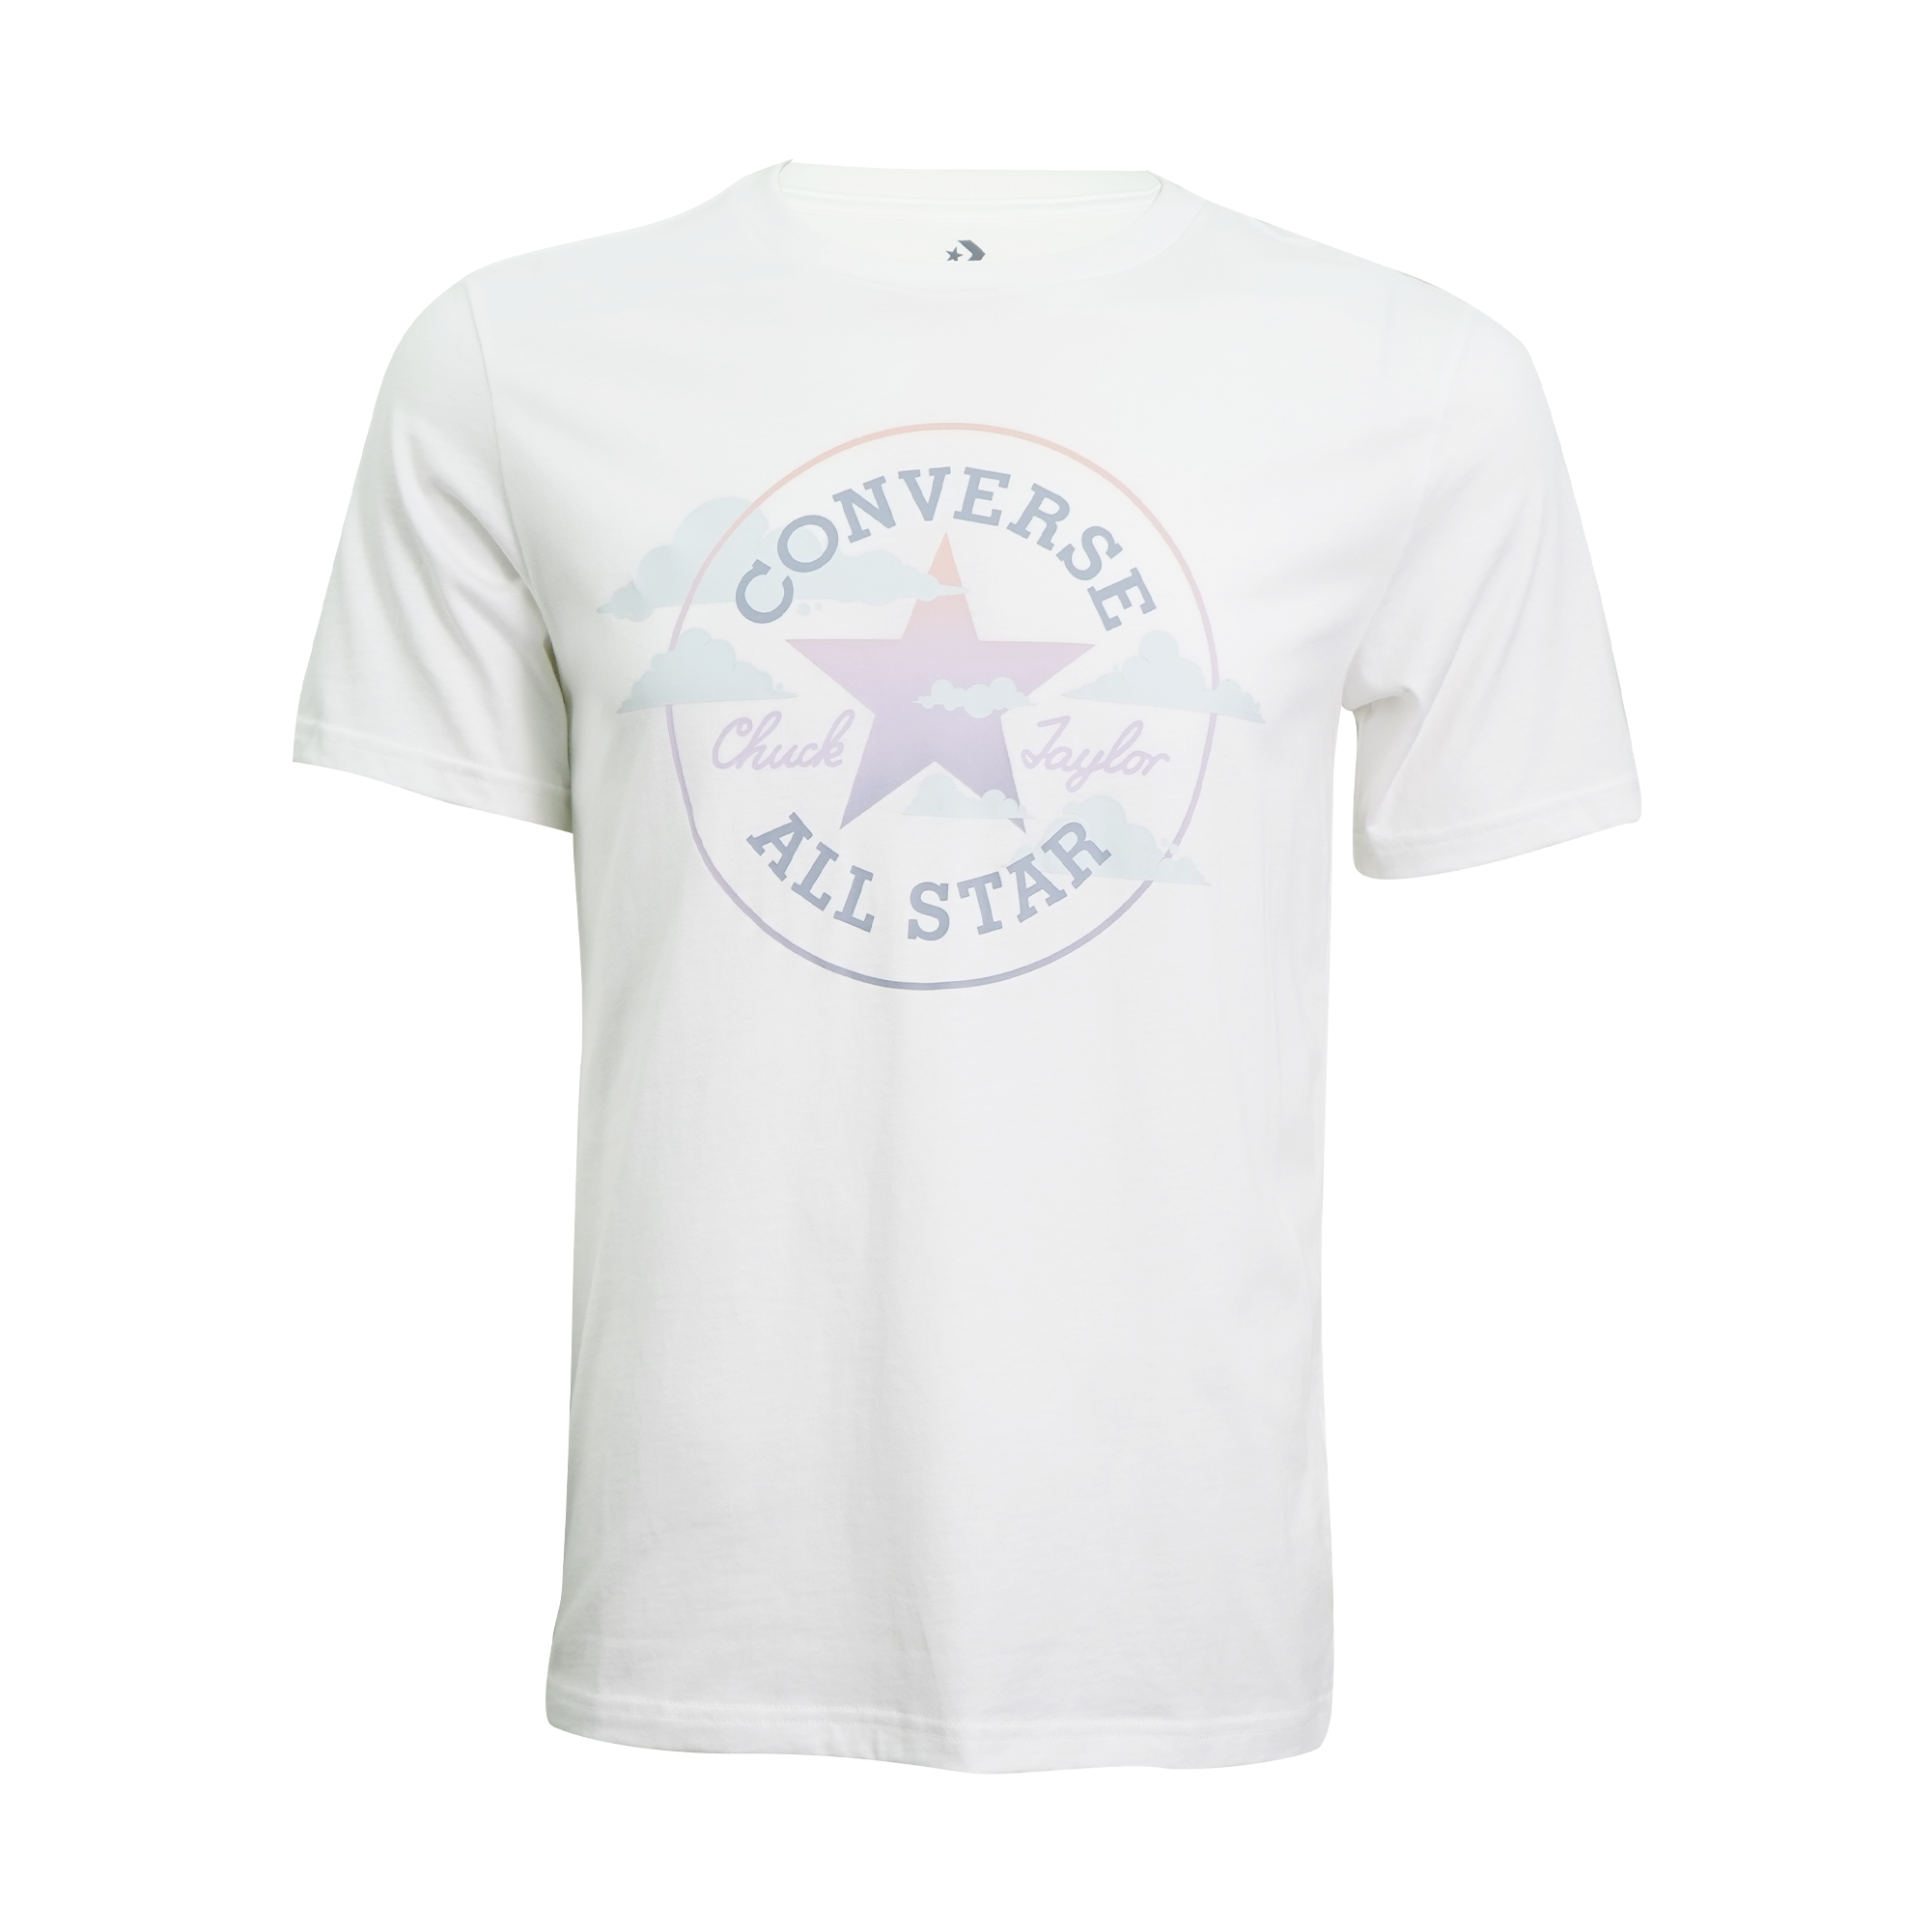 Culture Converse CLOUDS BLACK TEE GRAPHIC By – Fit CHEVRON STAR